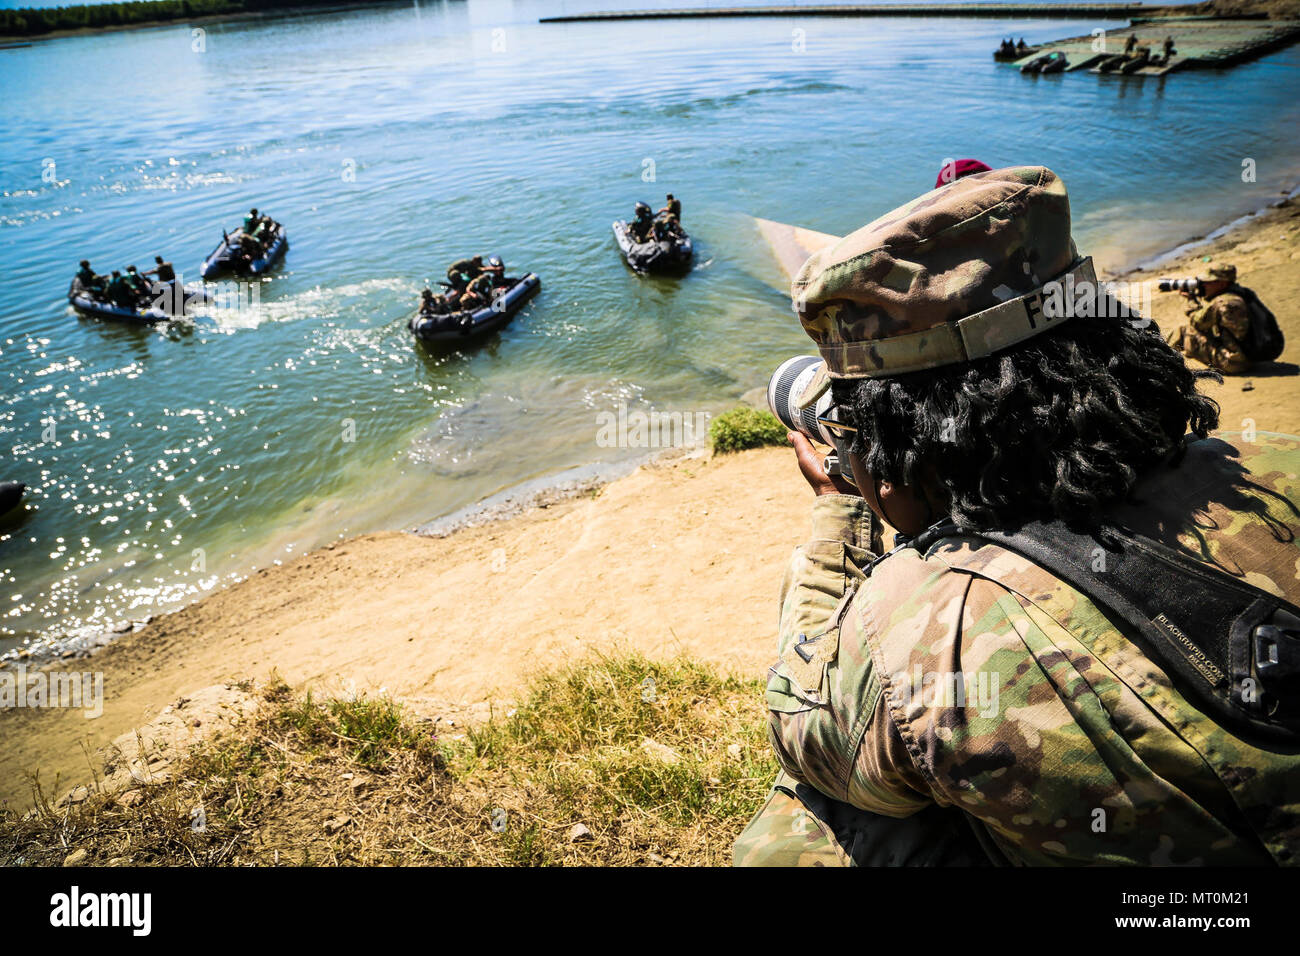 U.S. Army Pfc. Shekinah Frye, photographer assigned to 55th Signal Company (Combat Camera), documents a river crossing exercise during Saber Guardian 17 over the Danube River, Bordusani, Romania, July 15, 2017. Saber Guardian is a U.S. Army Europe-led multinational exercise that spans across Bulgaria, Hungary and Romania with more than 25,000 service members from 22 allied and partner nations. (U.S. Army photo by Staff Sgt. Timothy Villareal/Released) Stock Photo